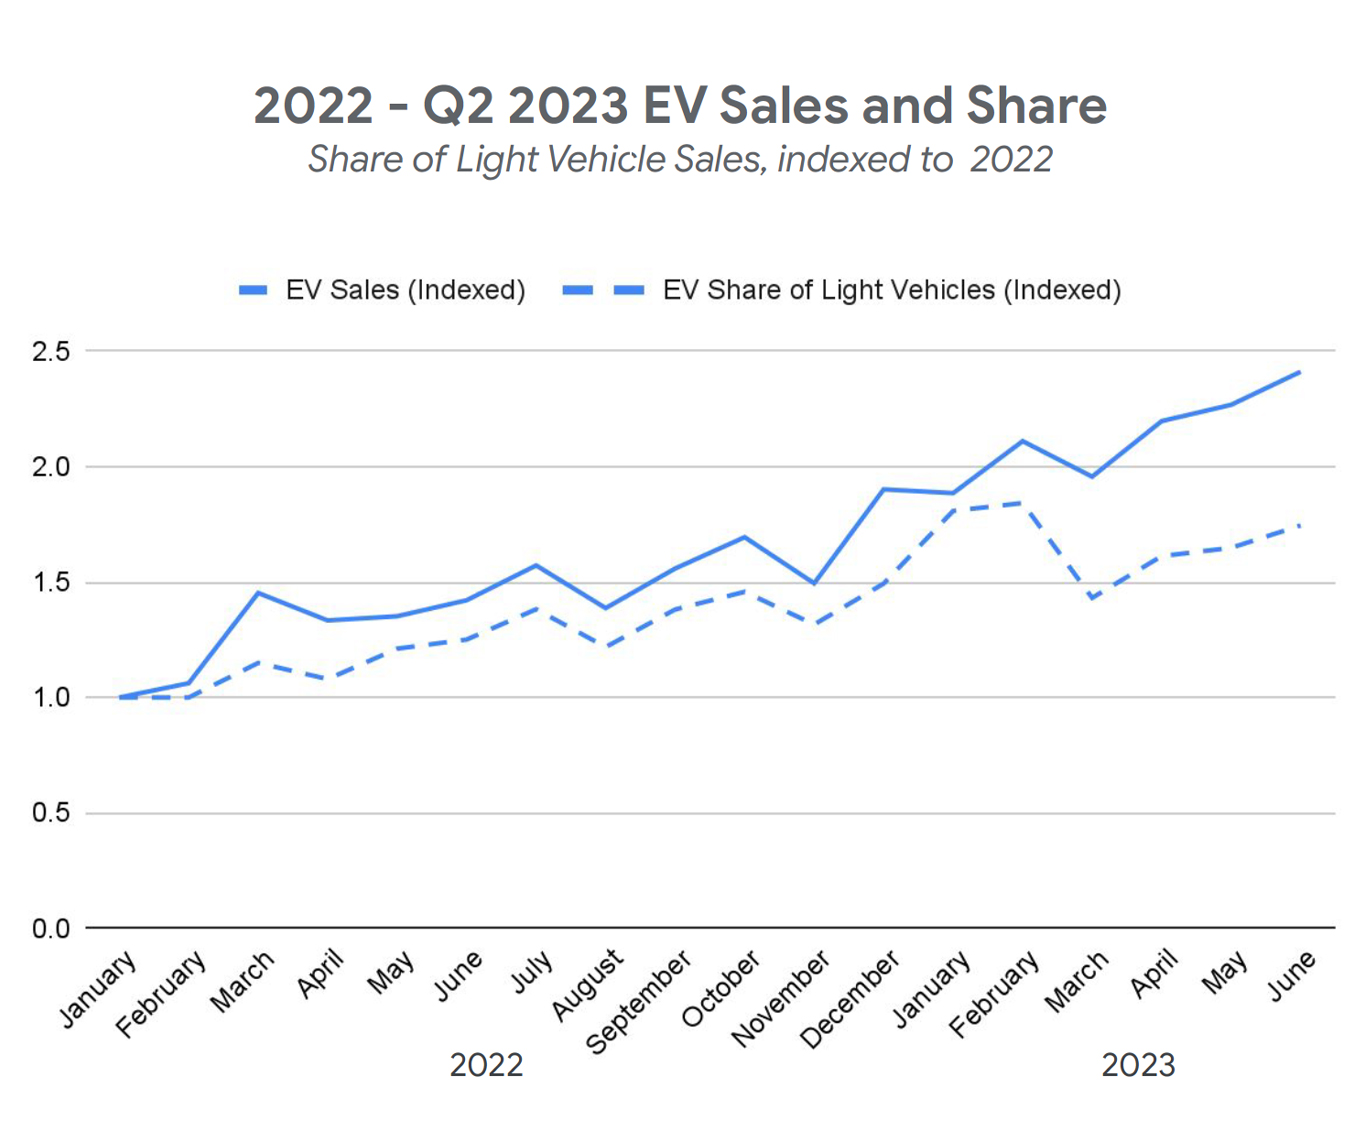 2022 - Q22023 EV Sales and Share Graph - Trends and Developments in Electric Vehicle Markets